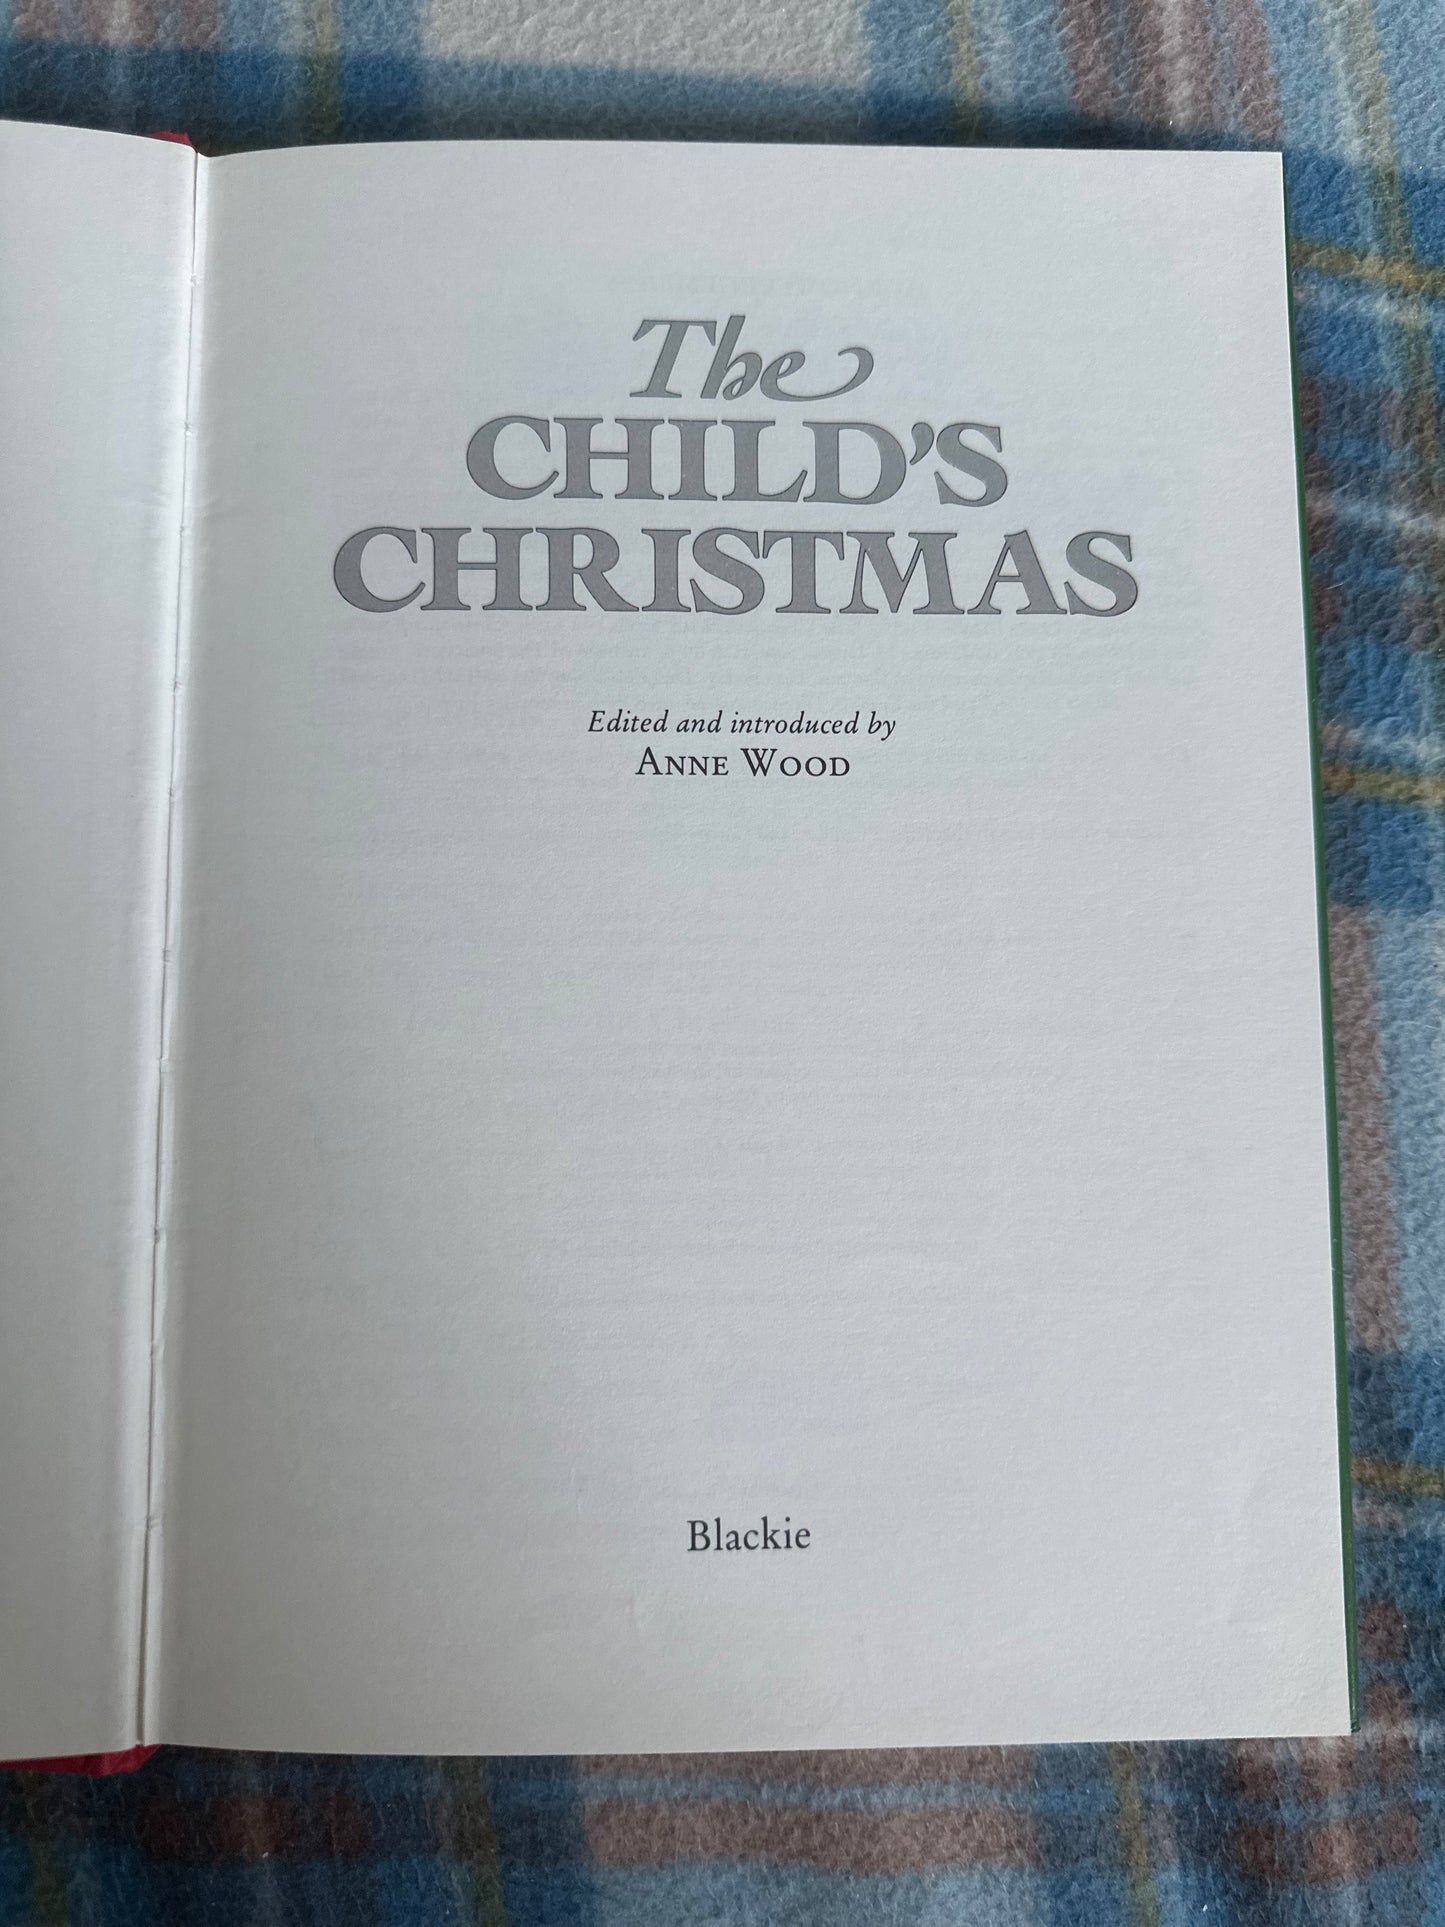 1988 The Child’s Christmas - Edited Anne Wood(Charles Robinson illustration) Blackie Publisher